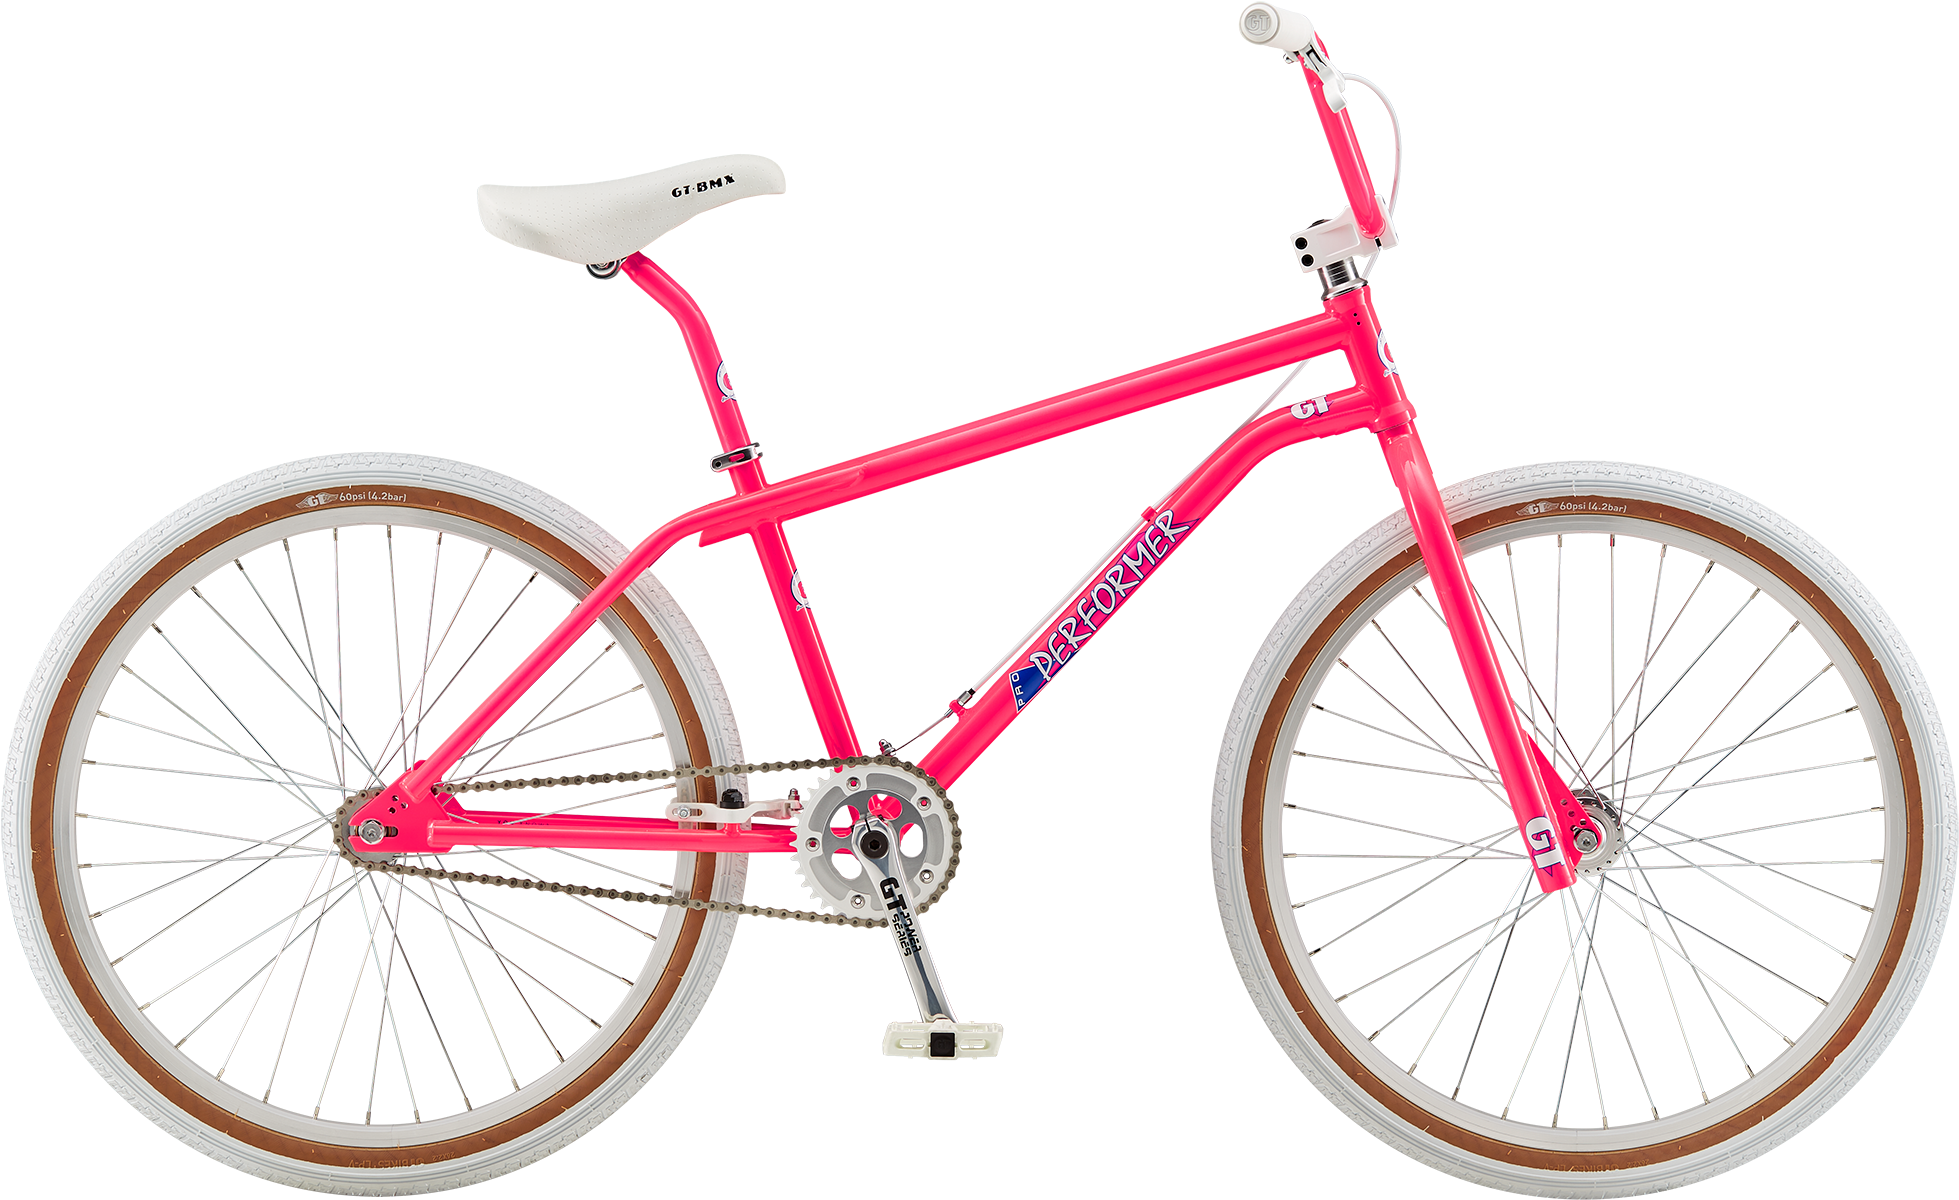 A Pink Bicycle With White Wheels